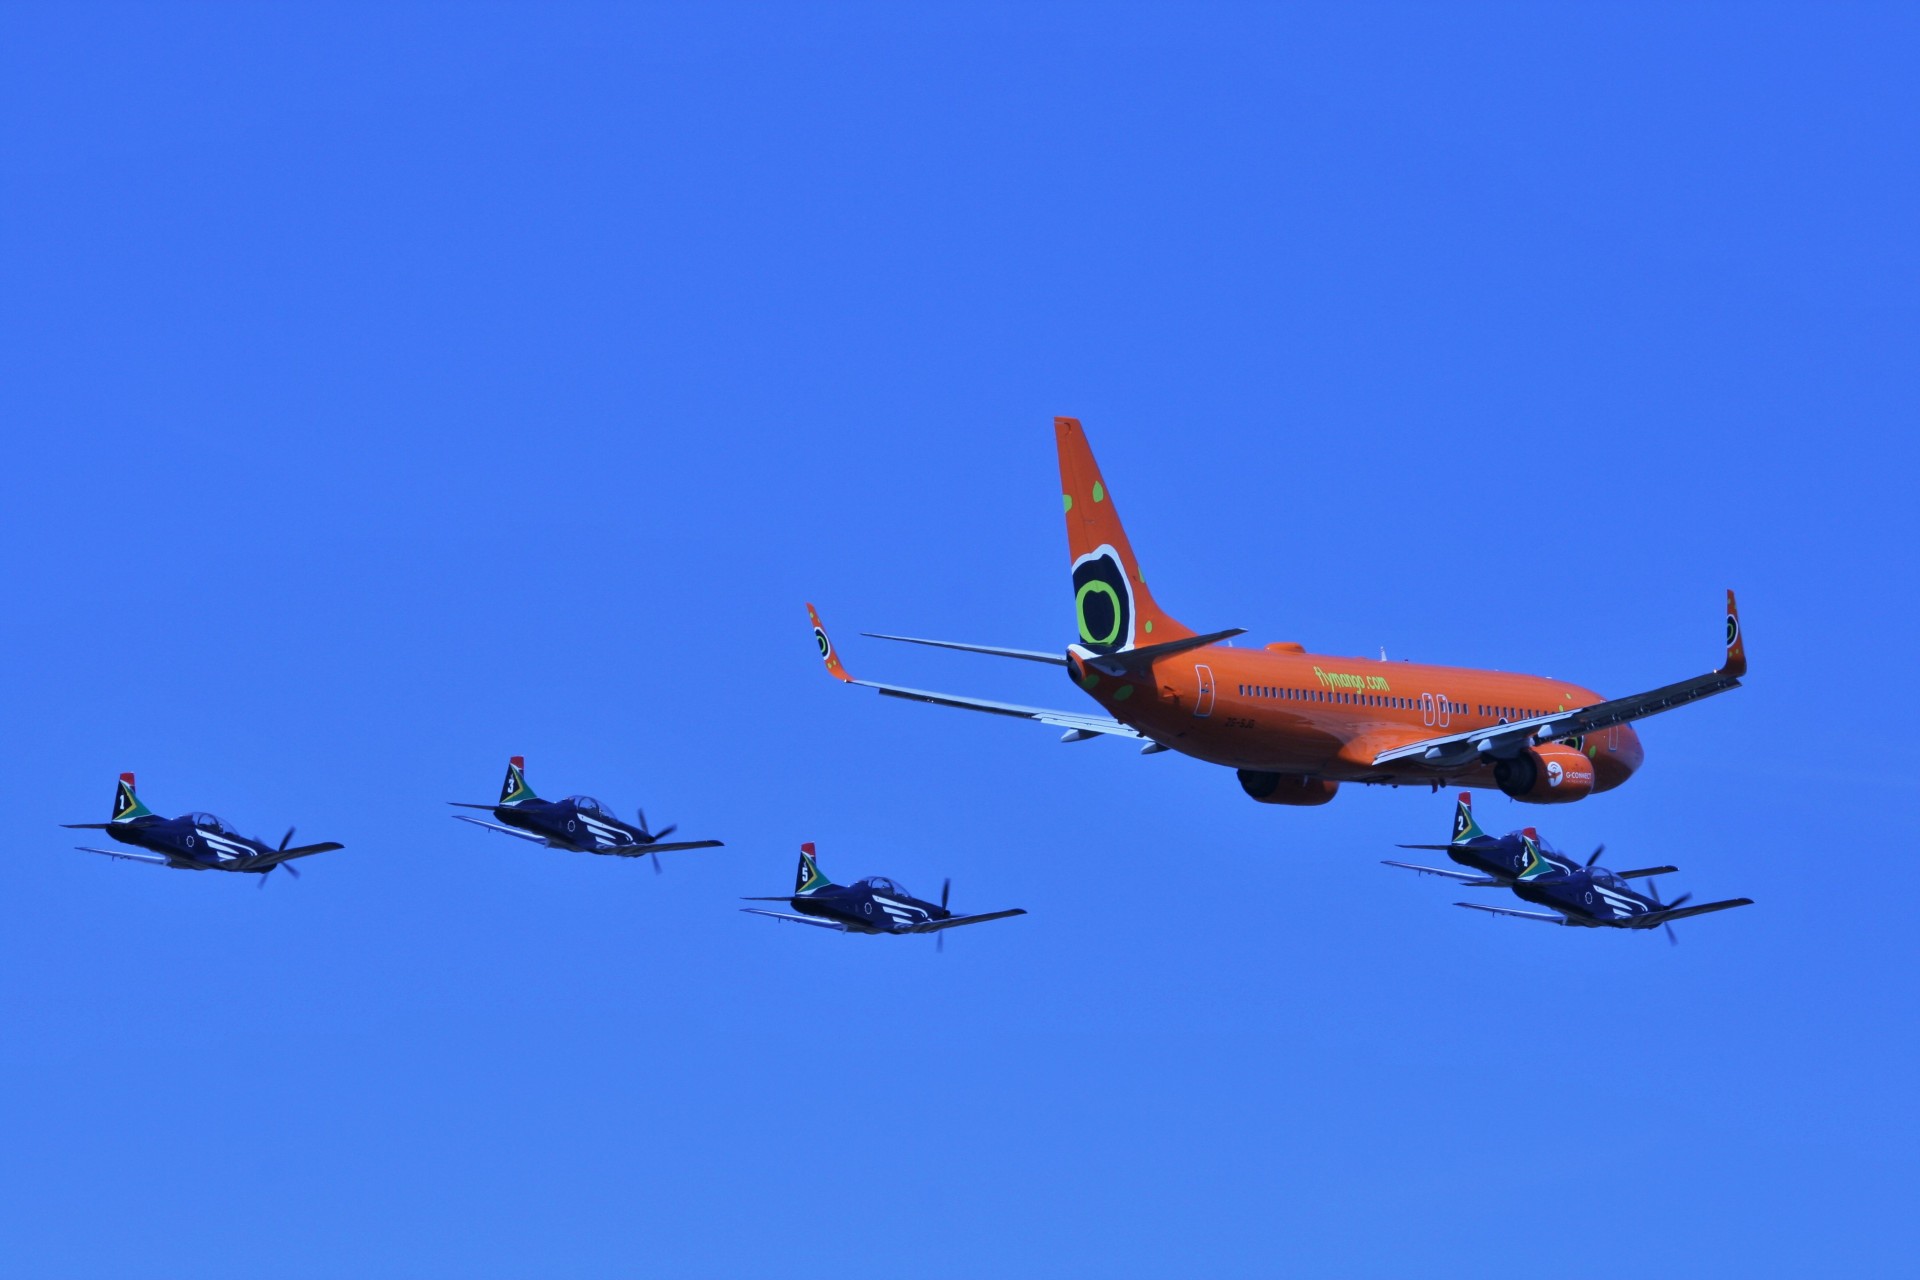 jets formation team free photo